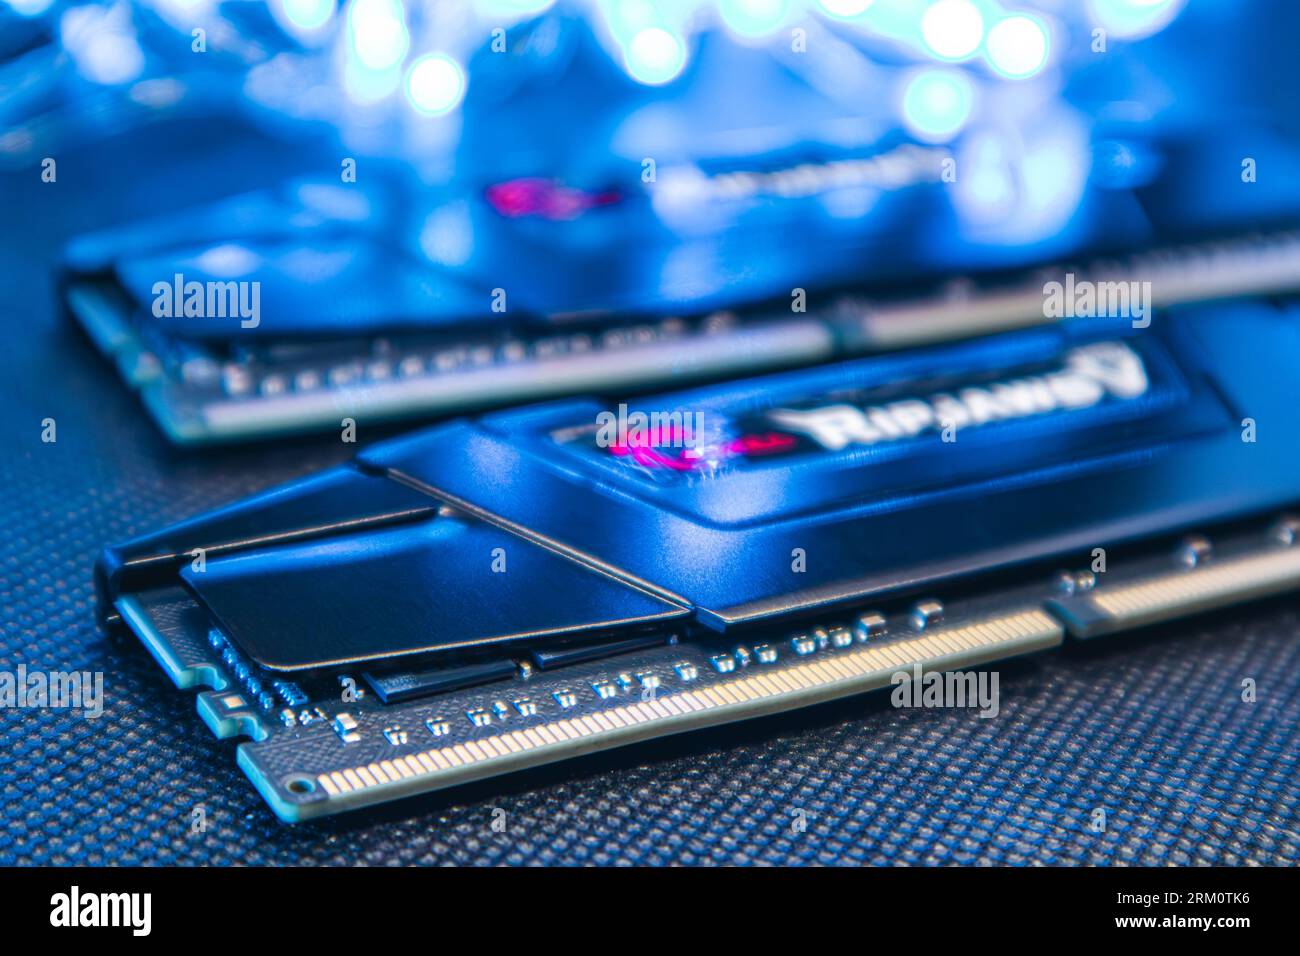 Kyiv, Ukraine - January 05, 2022: G.Skill Ripjaws V series memory module DDR4 DRAM with electrical contacts in blue light. Computer RAM chipset close- Stock Photo